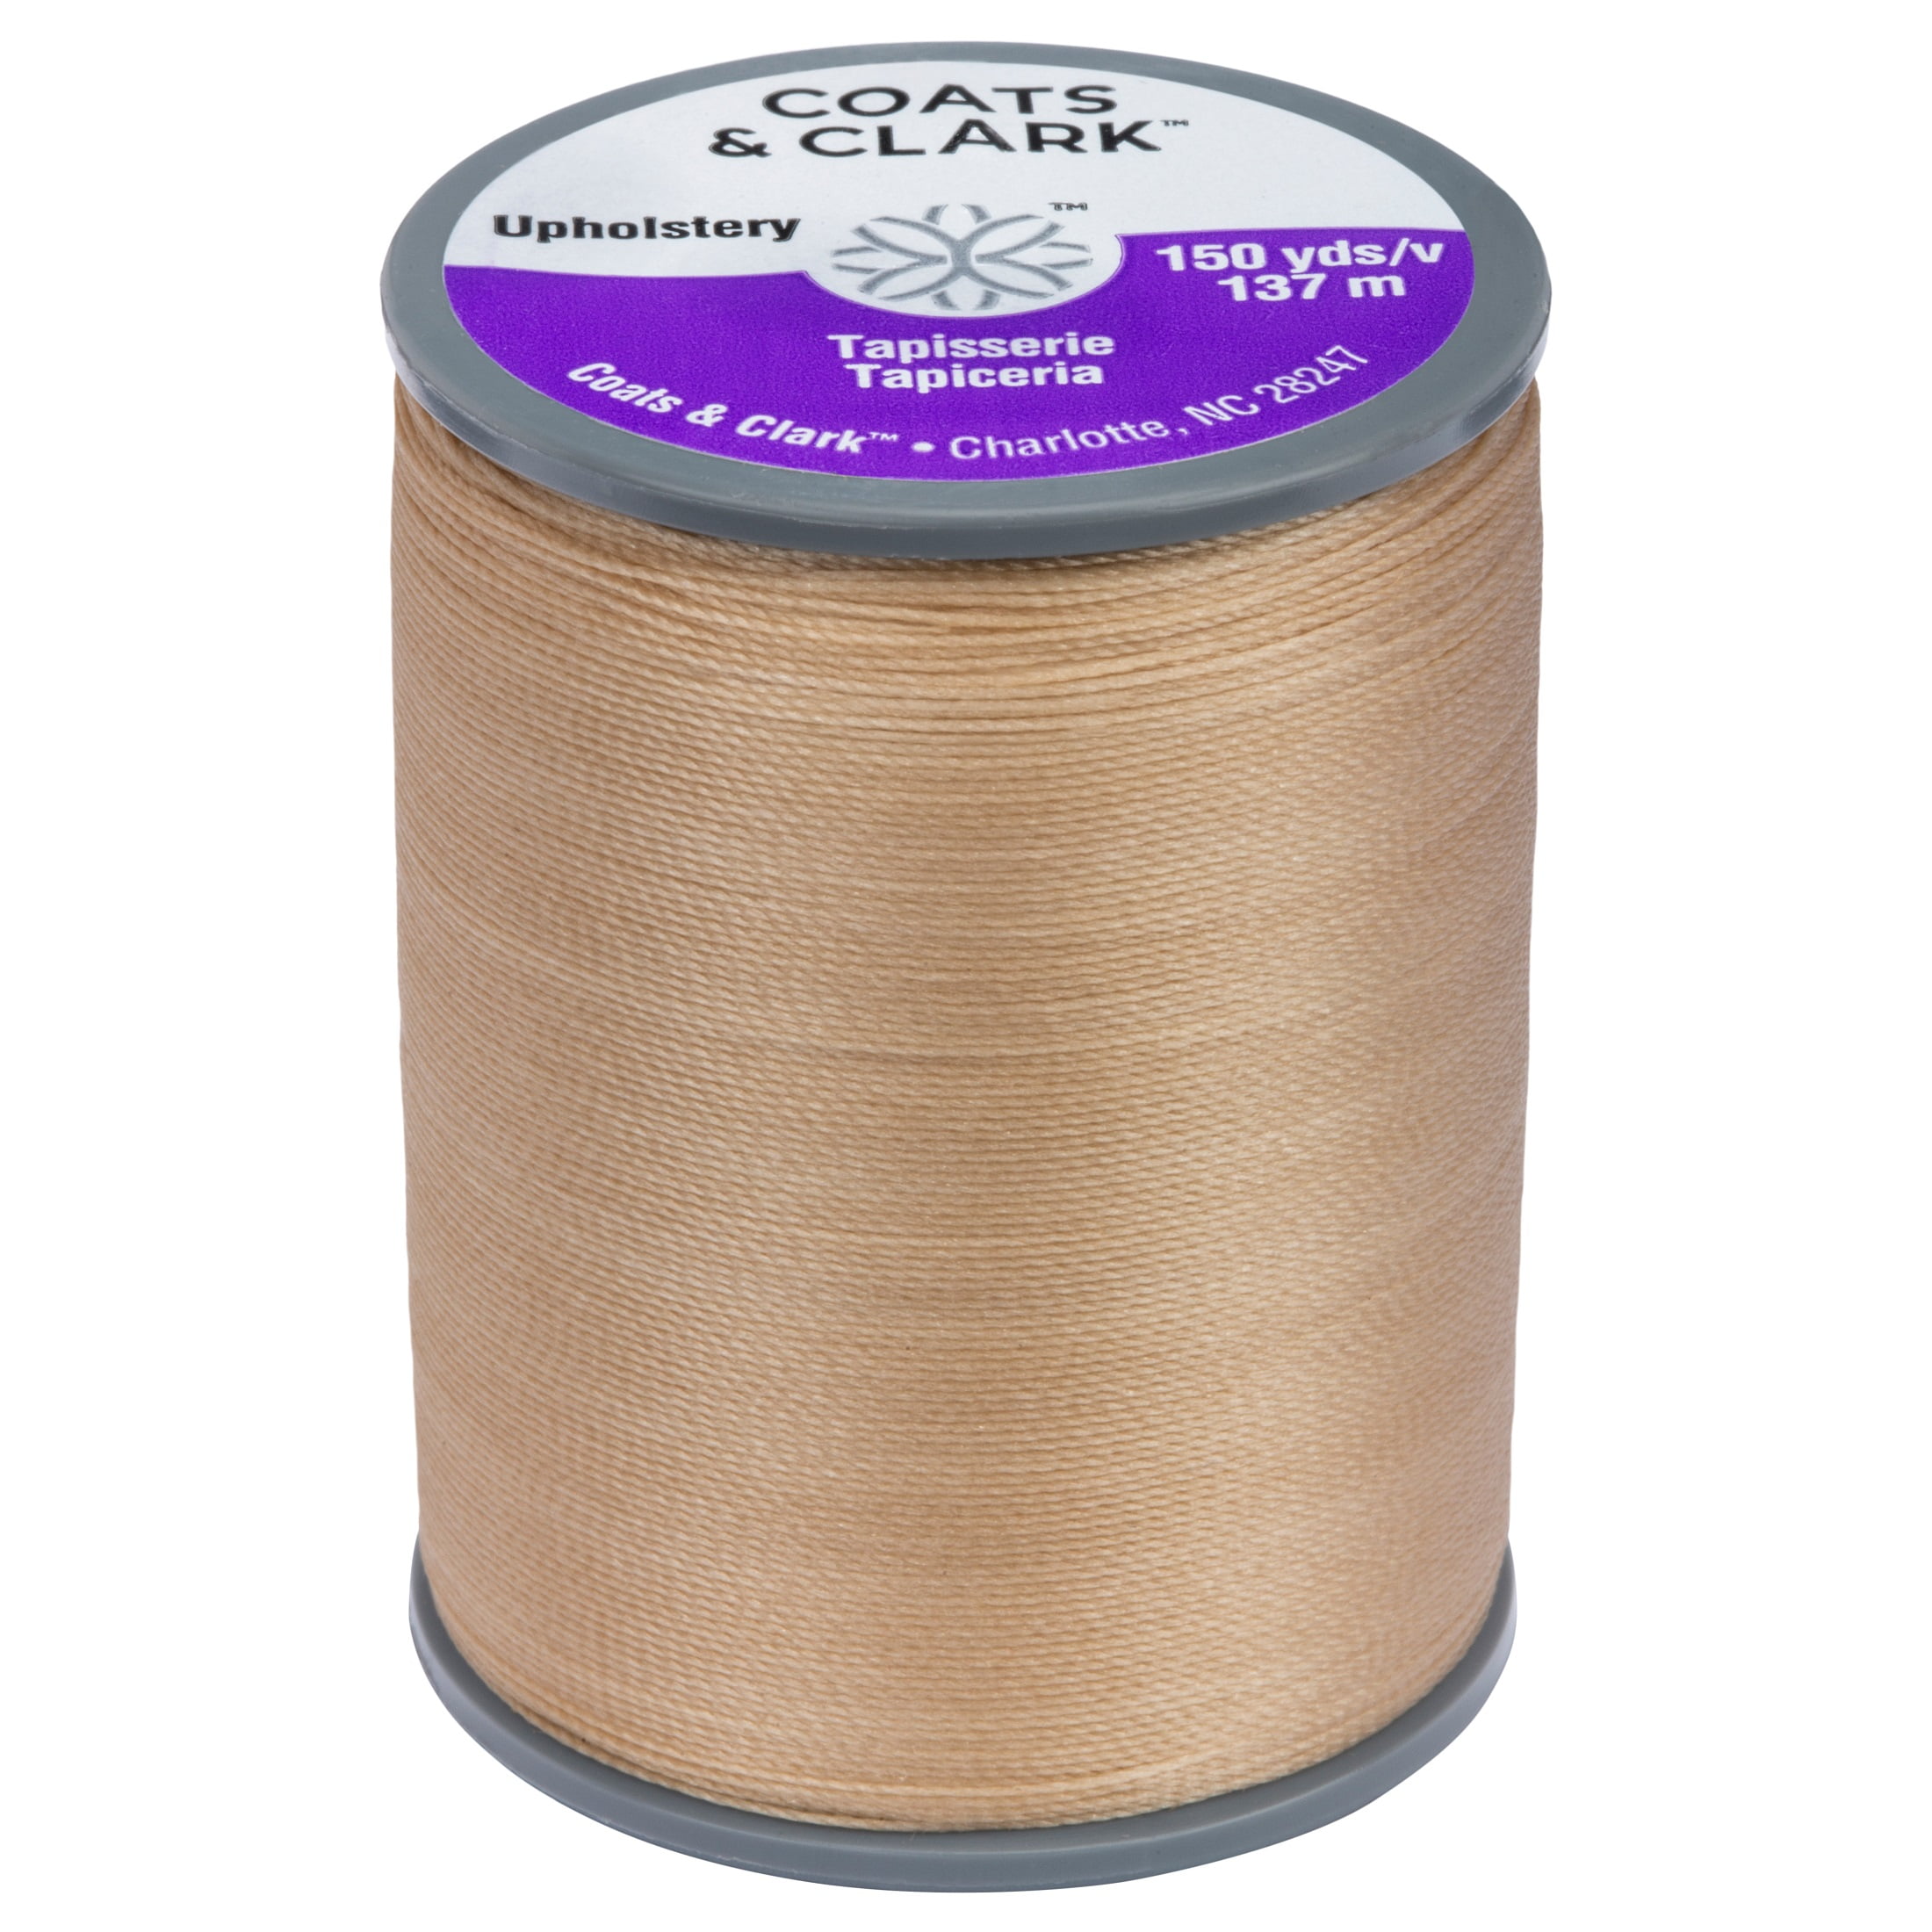 Upholstery Set | One Pack of Four Upholstery Needles for Coats, Clothes,  Shirts, Pants | Extra Strong Upholstery Nylon Thread, 150-Yard, Natural  Color